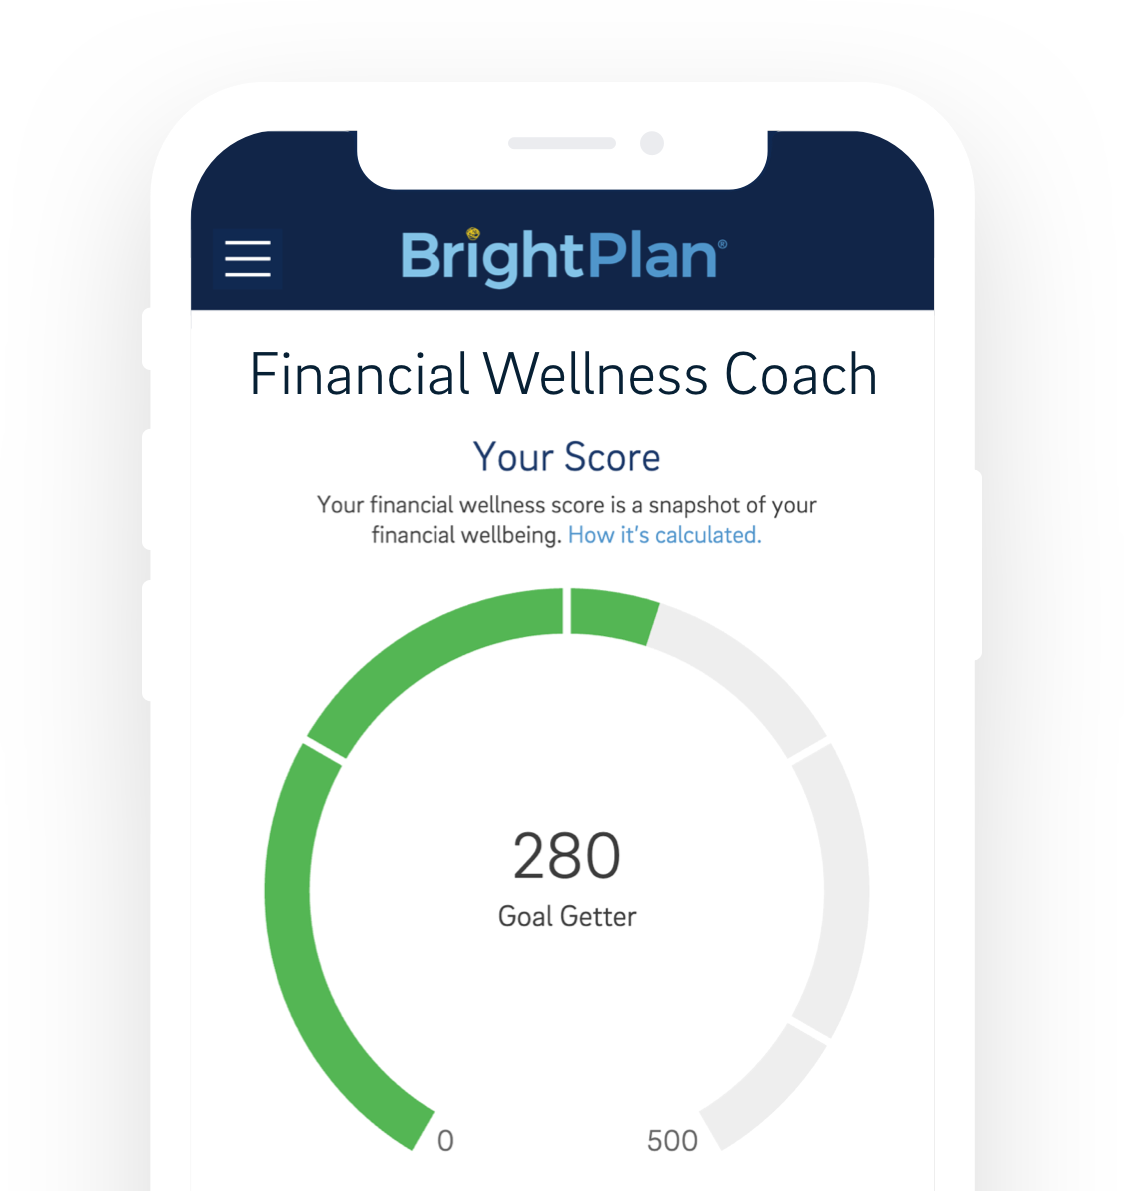 Support For Employees Through The Financial Wellness